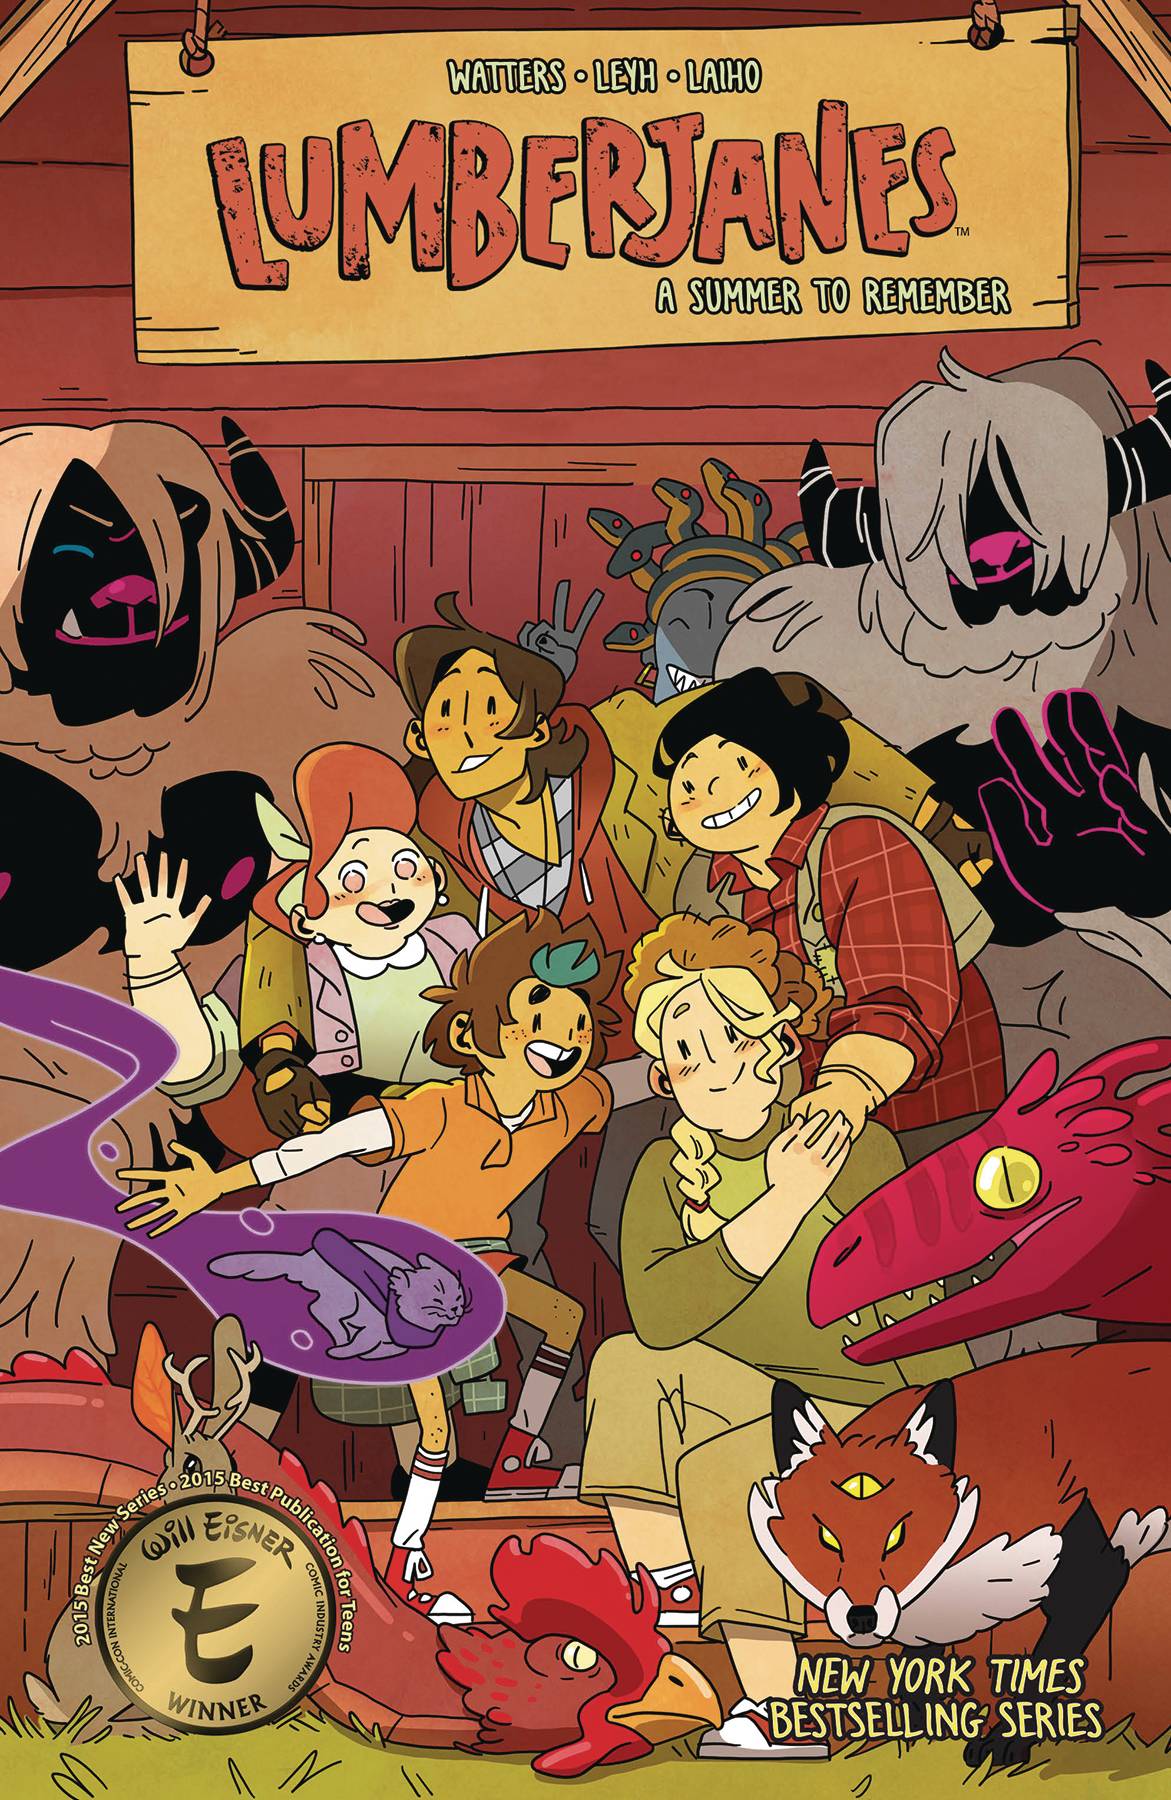 Lumberjanes vol 19: A Summer To Remember